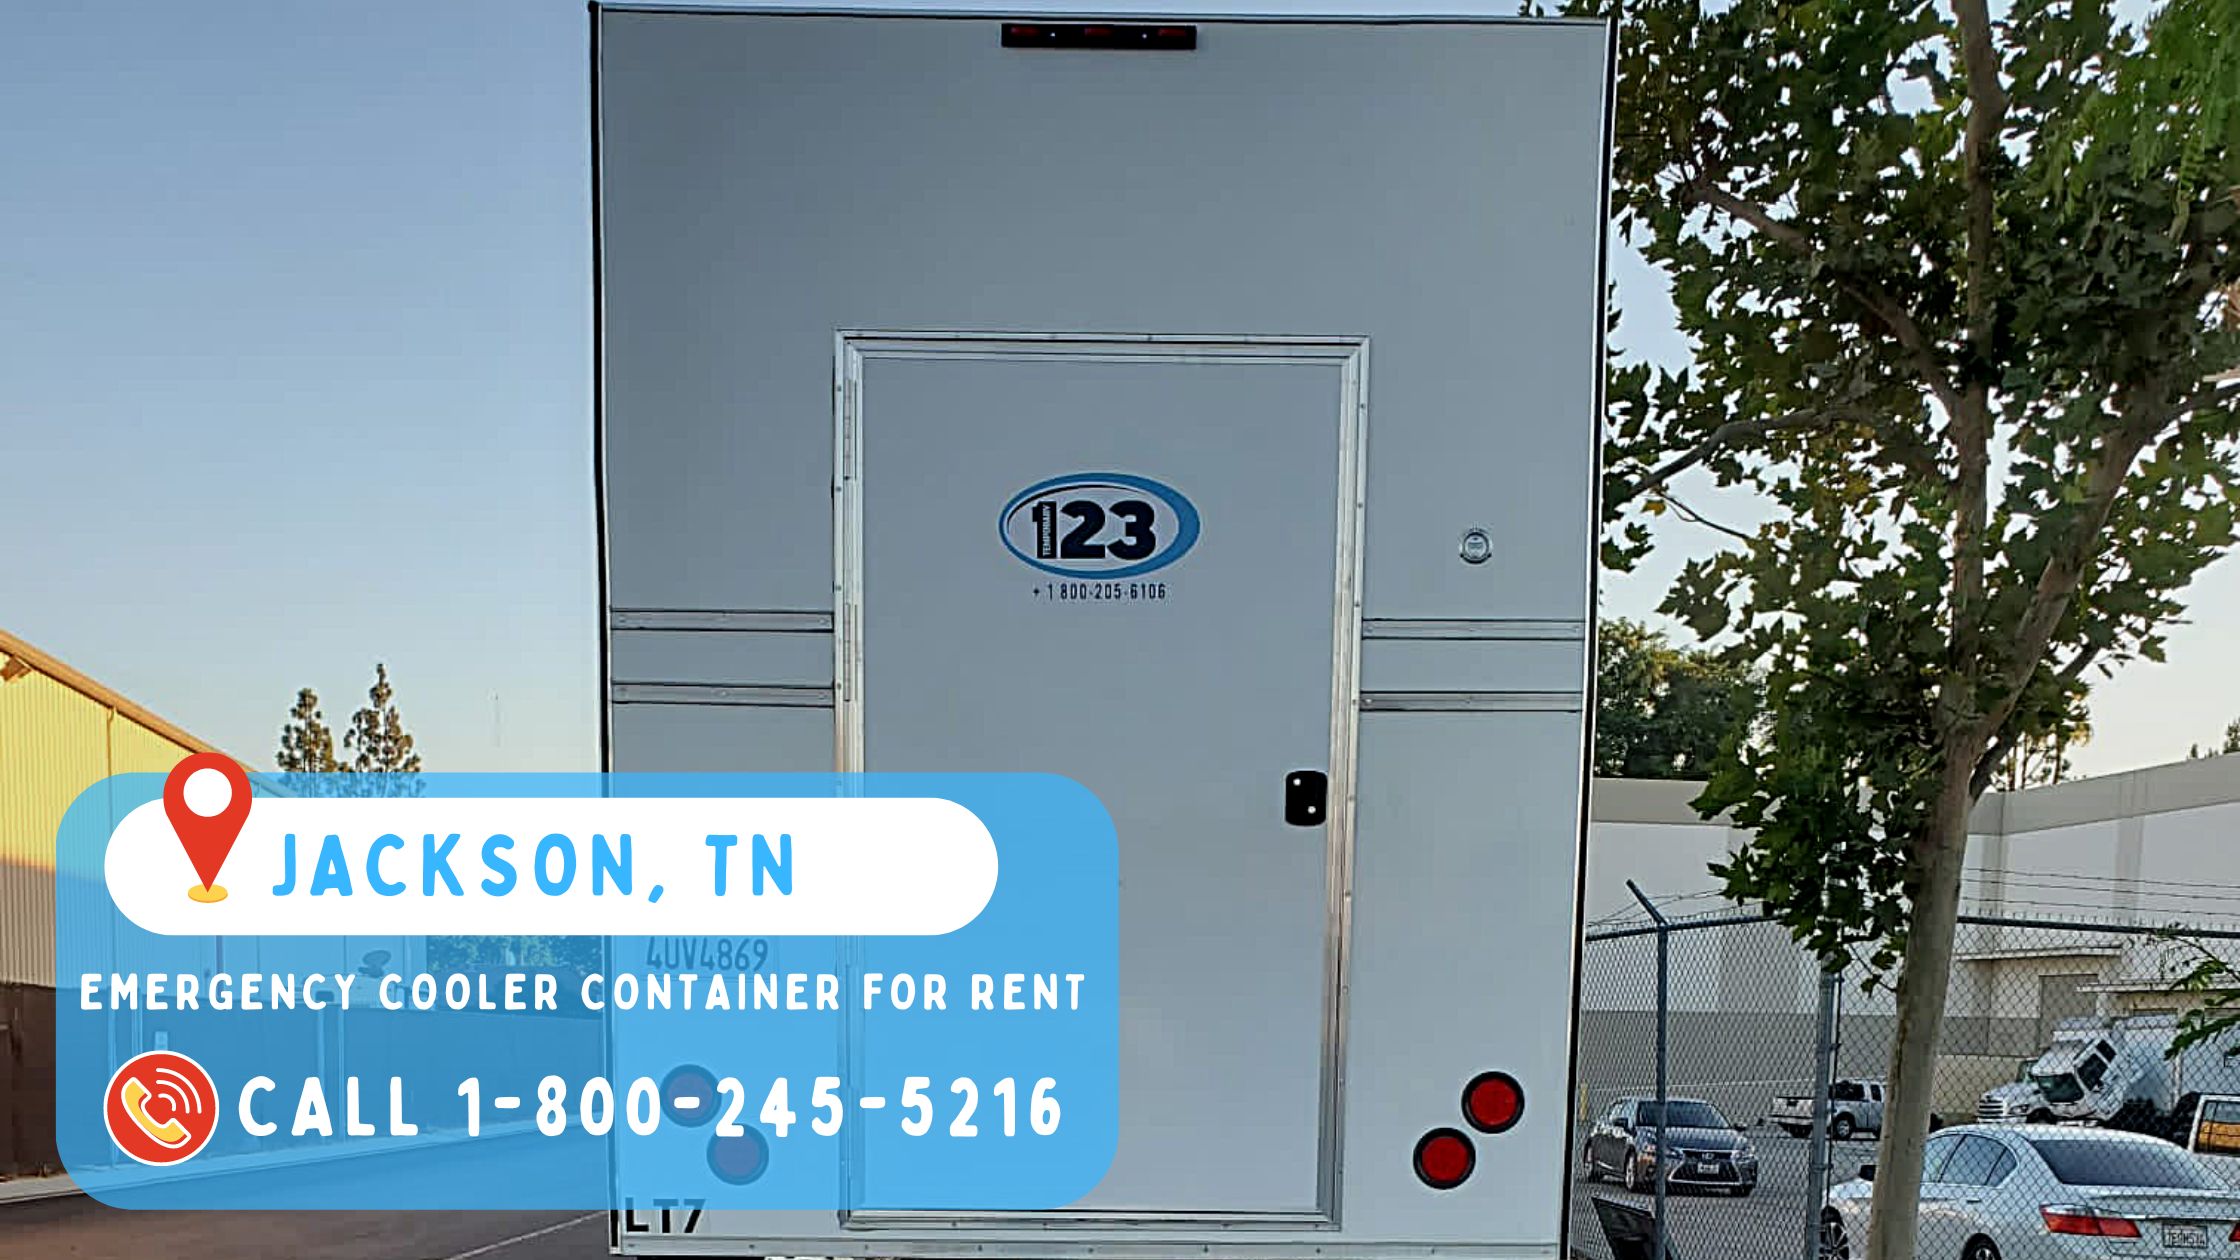 Emergency Cooler Container for Rent in Jackson